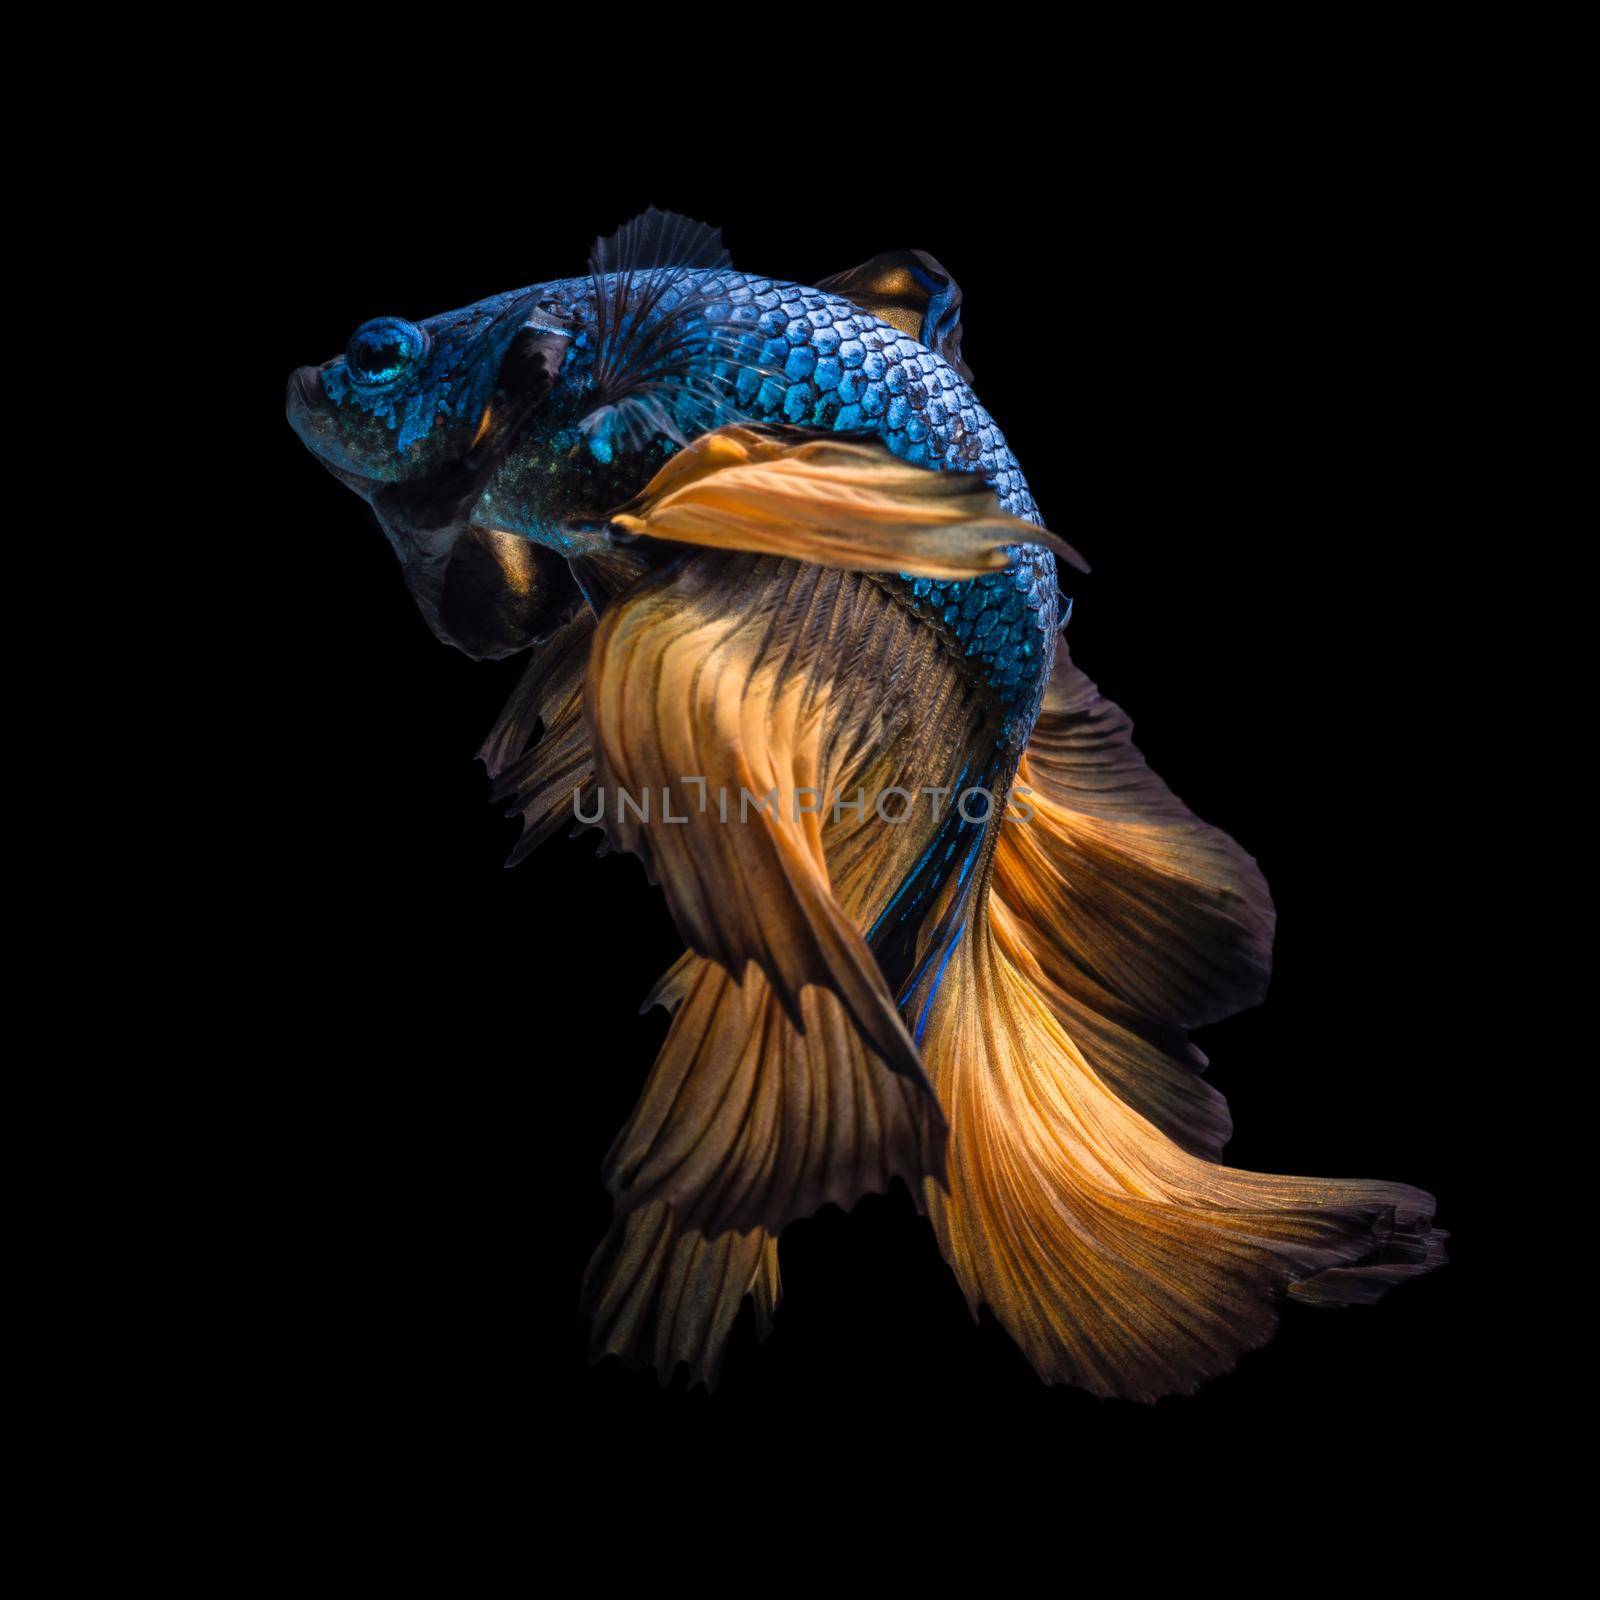 Colourful Betta fish,Siamese fighting fish in movement isolated on black background.